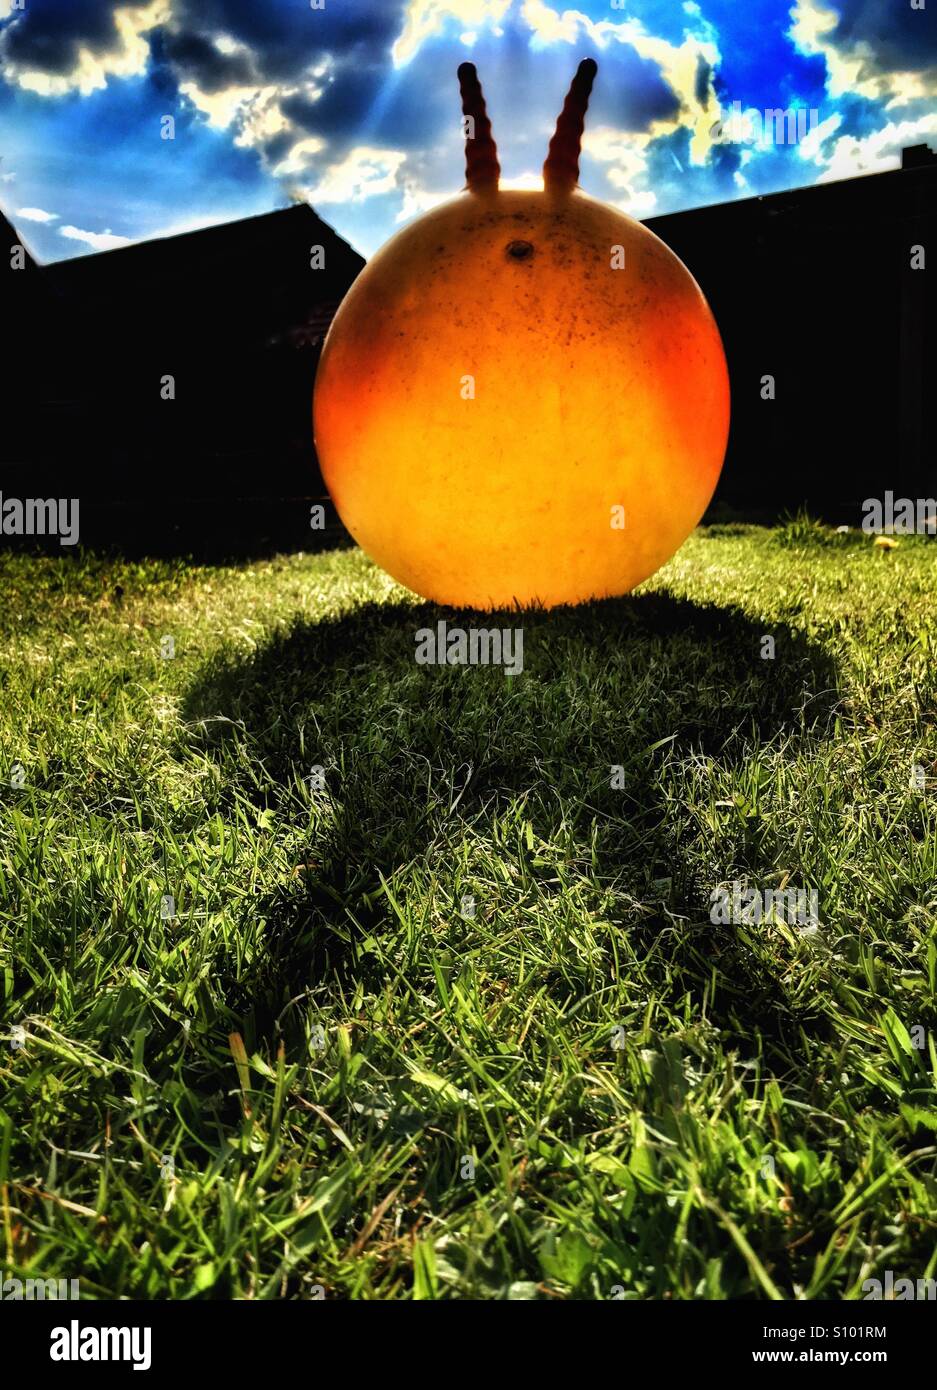 Space hopper casting shadow on grass in late evening light Stock Photo